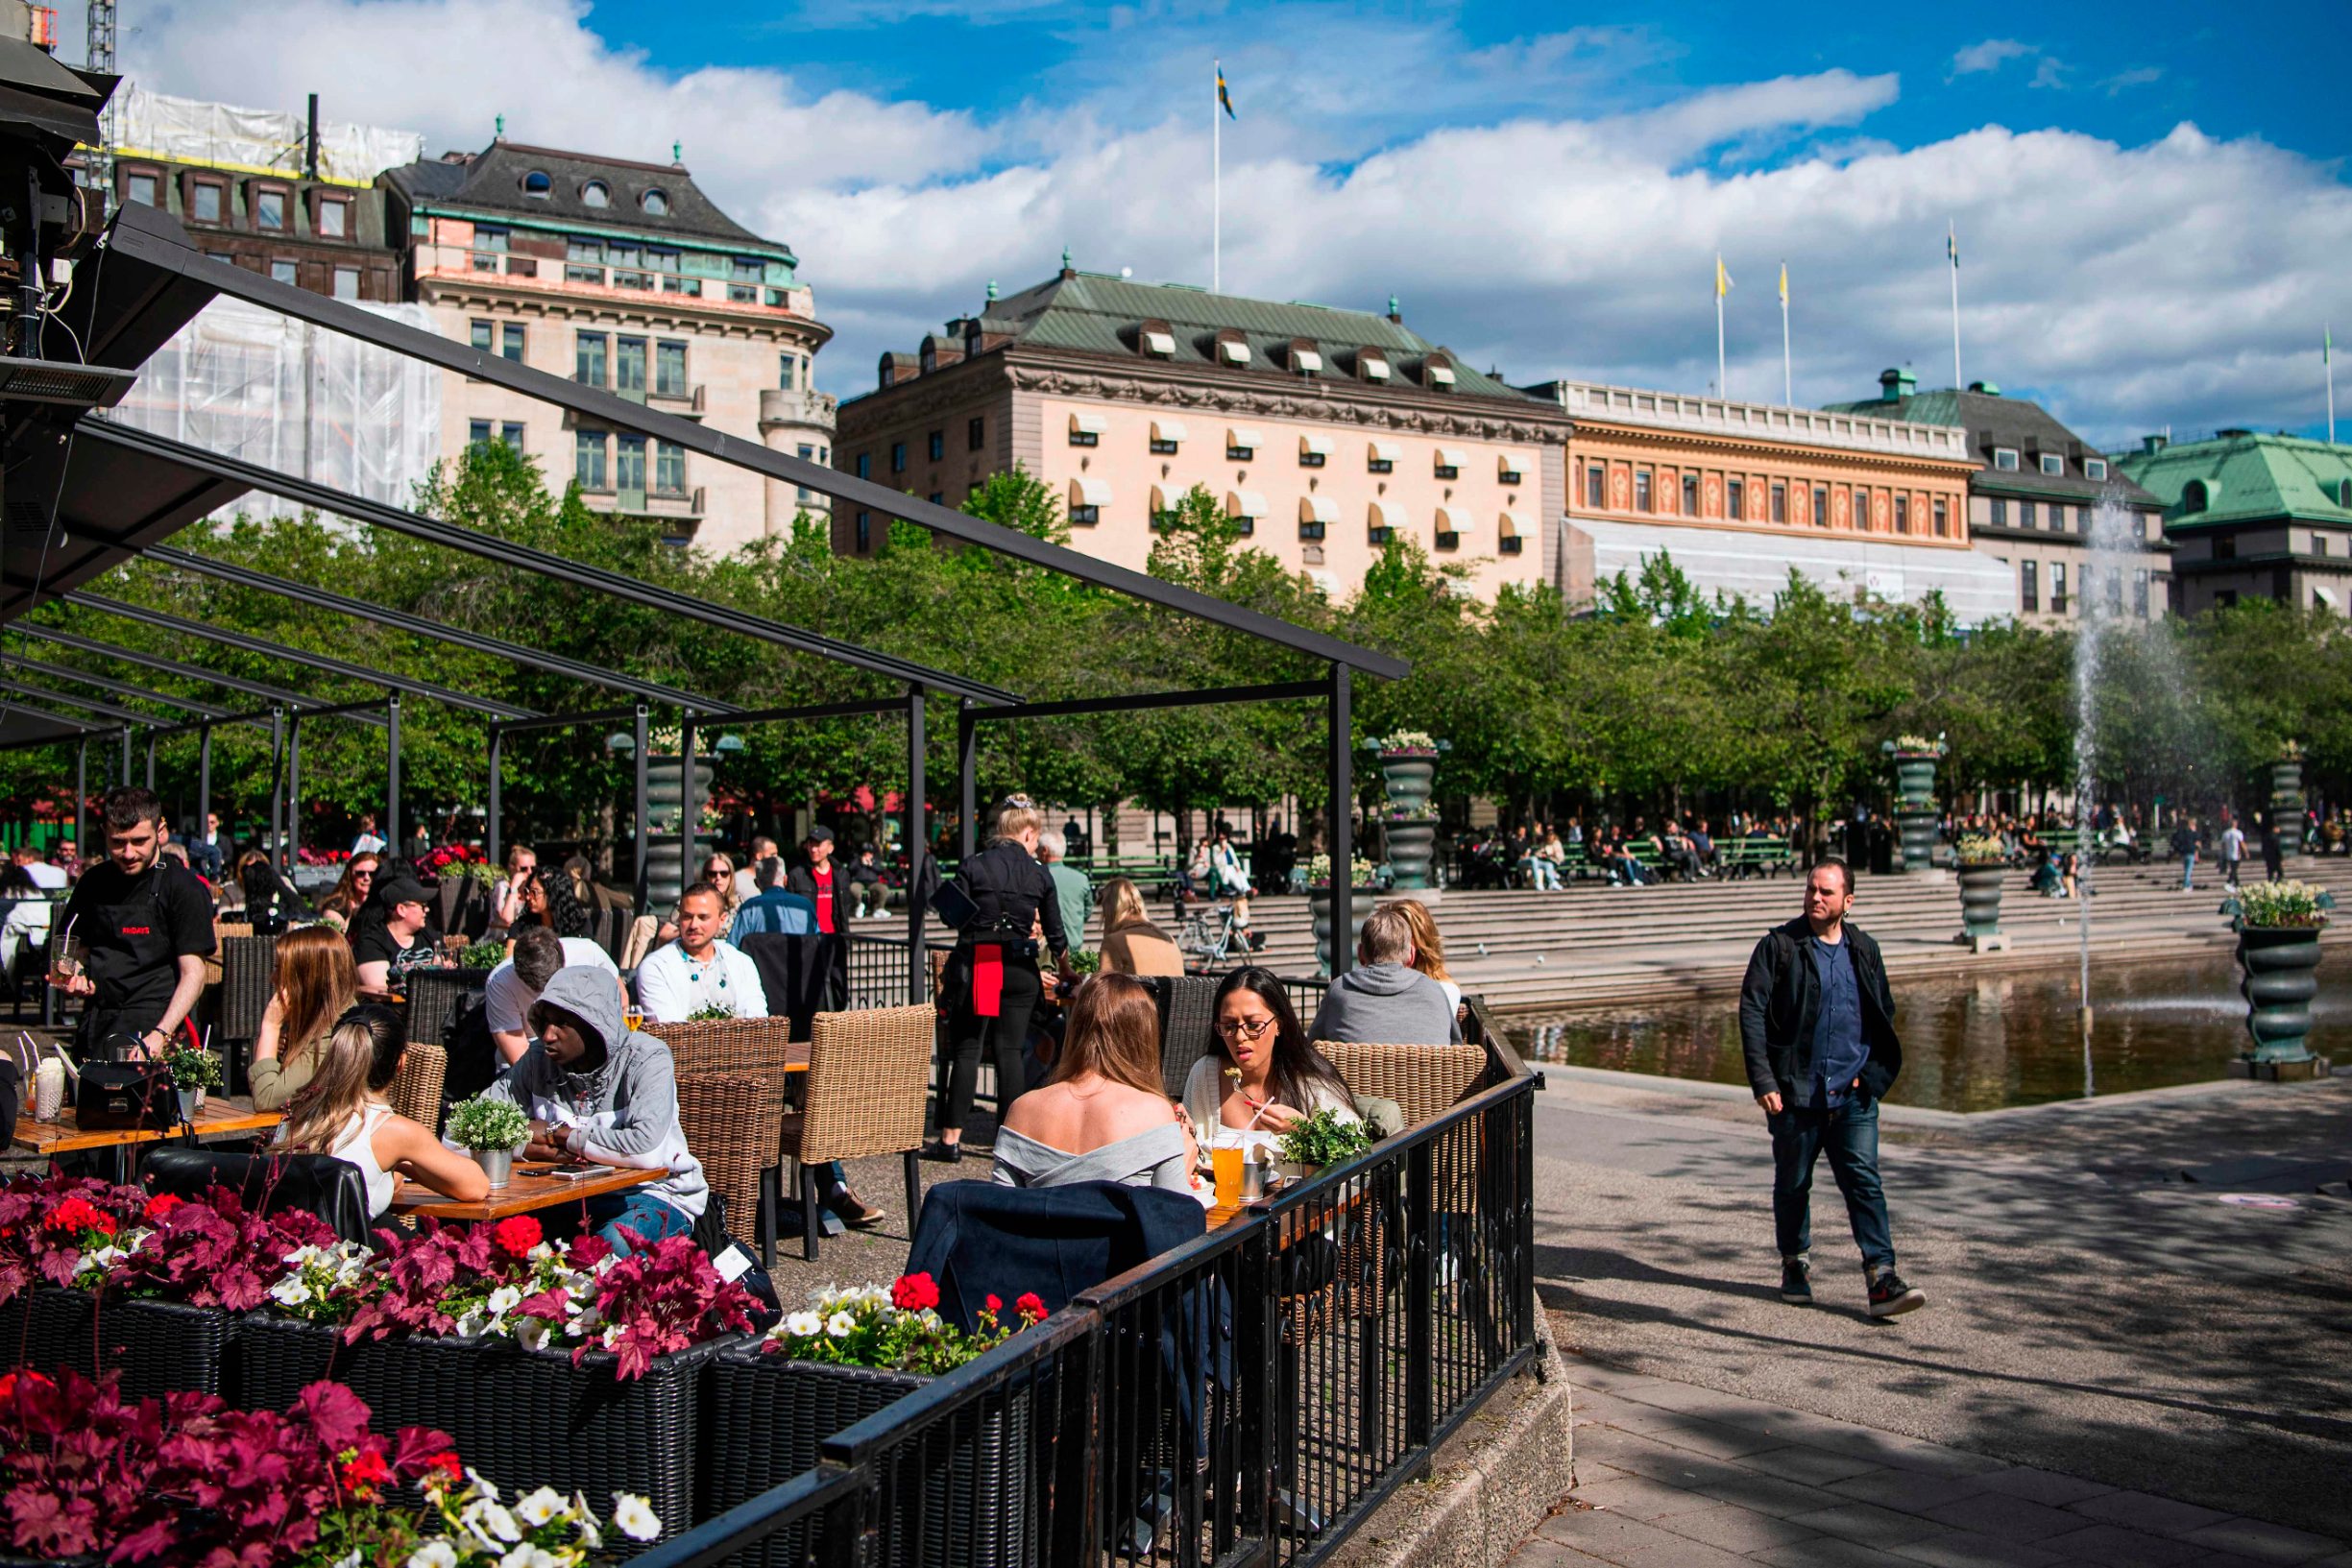 People sit in a restaurant in Stockholm on May 29, 2020, amid the coronavirus COVID-19 pandemic. - Sweden's two biggest opposition parties called Friday for an independent commission to be appointed within weeks to probe the country's response to the new coronavirus. (Photo by Jonathan NACKSTRAND / AFP)